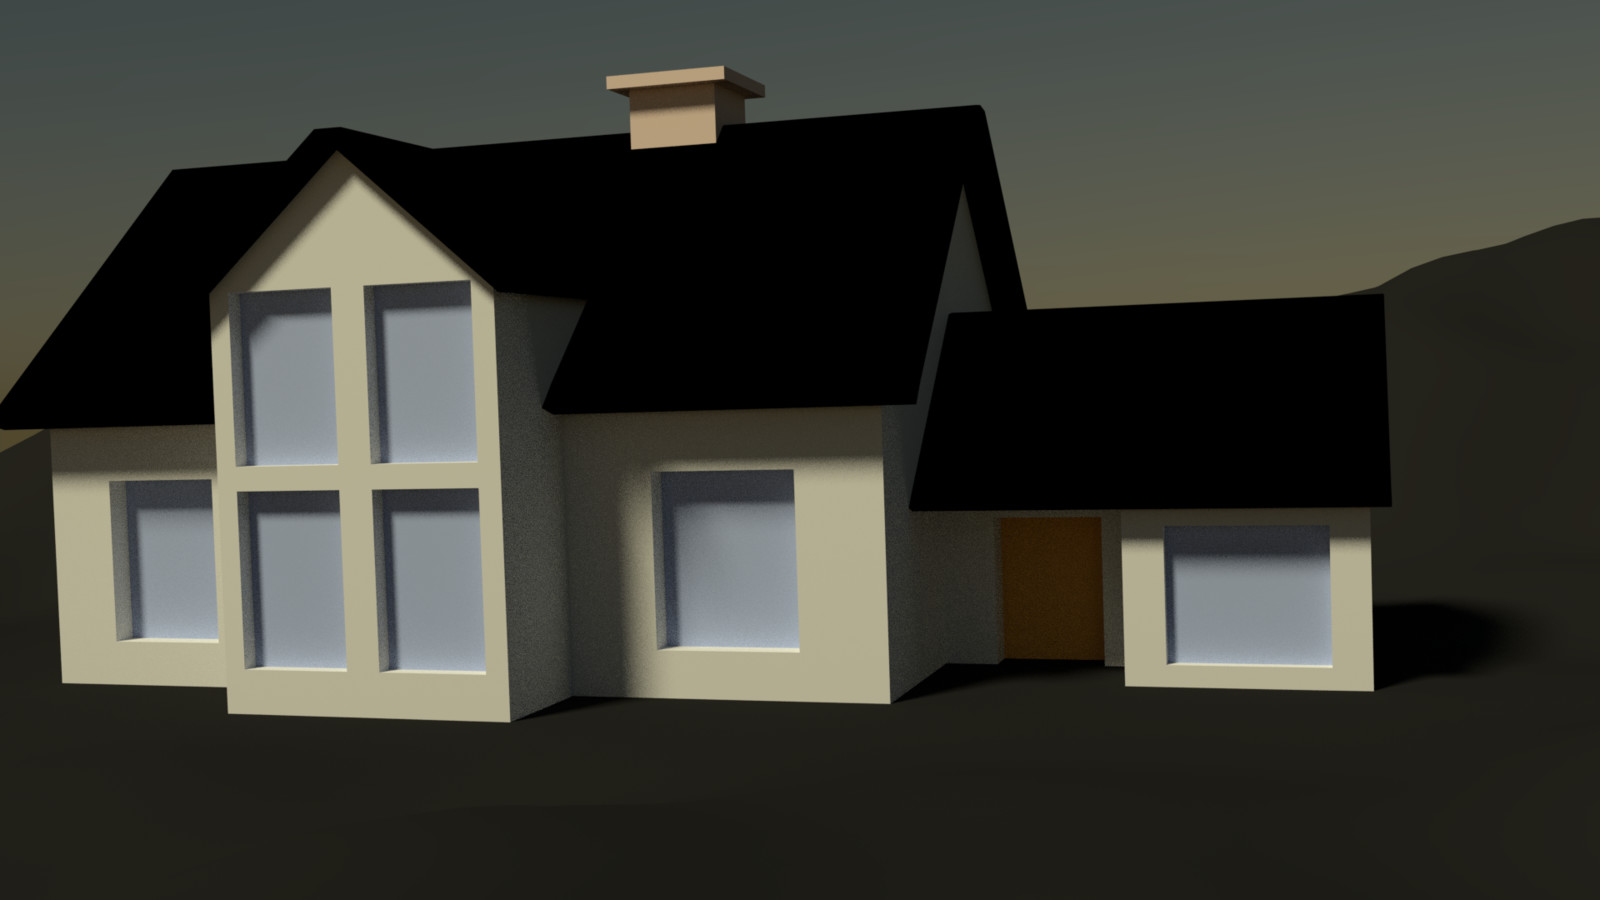 Modelled house without texture or material